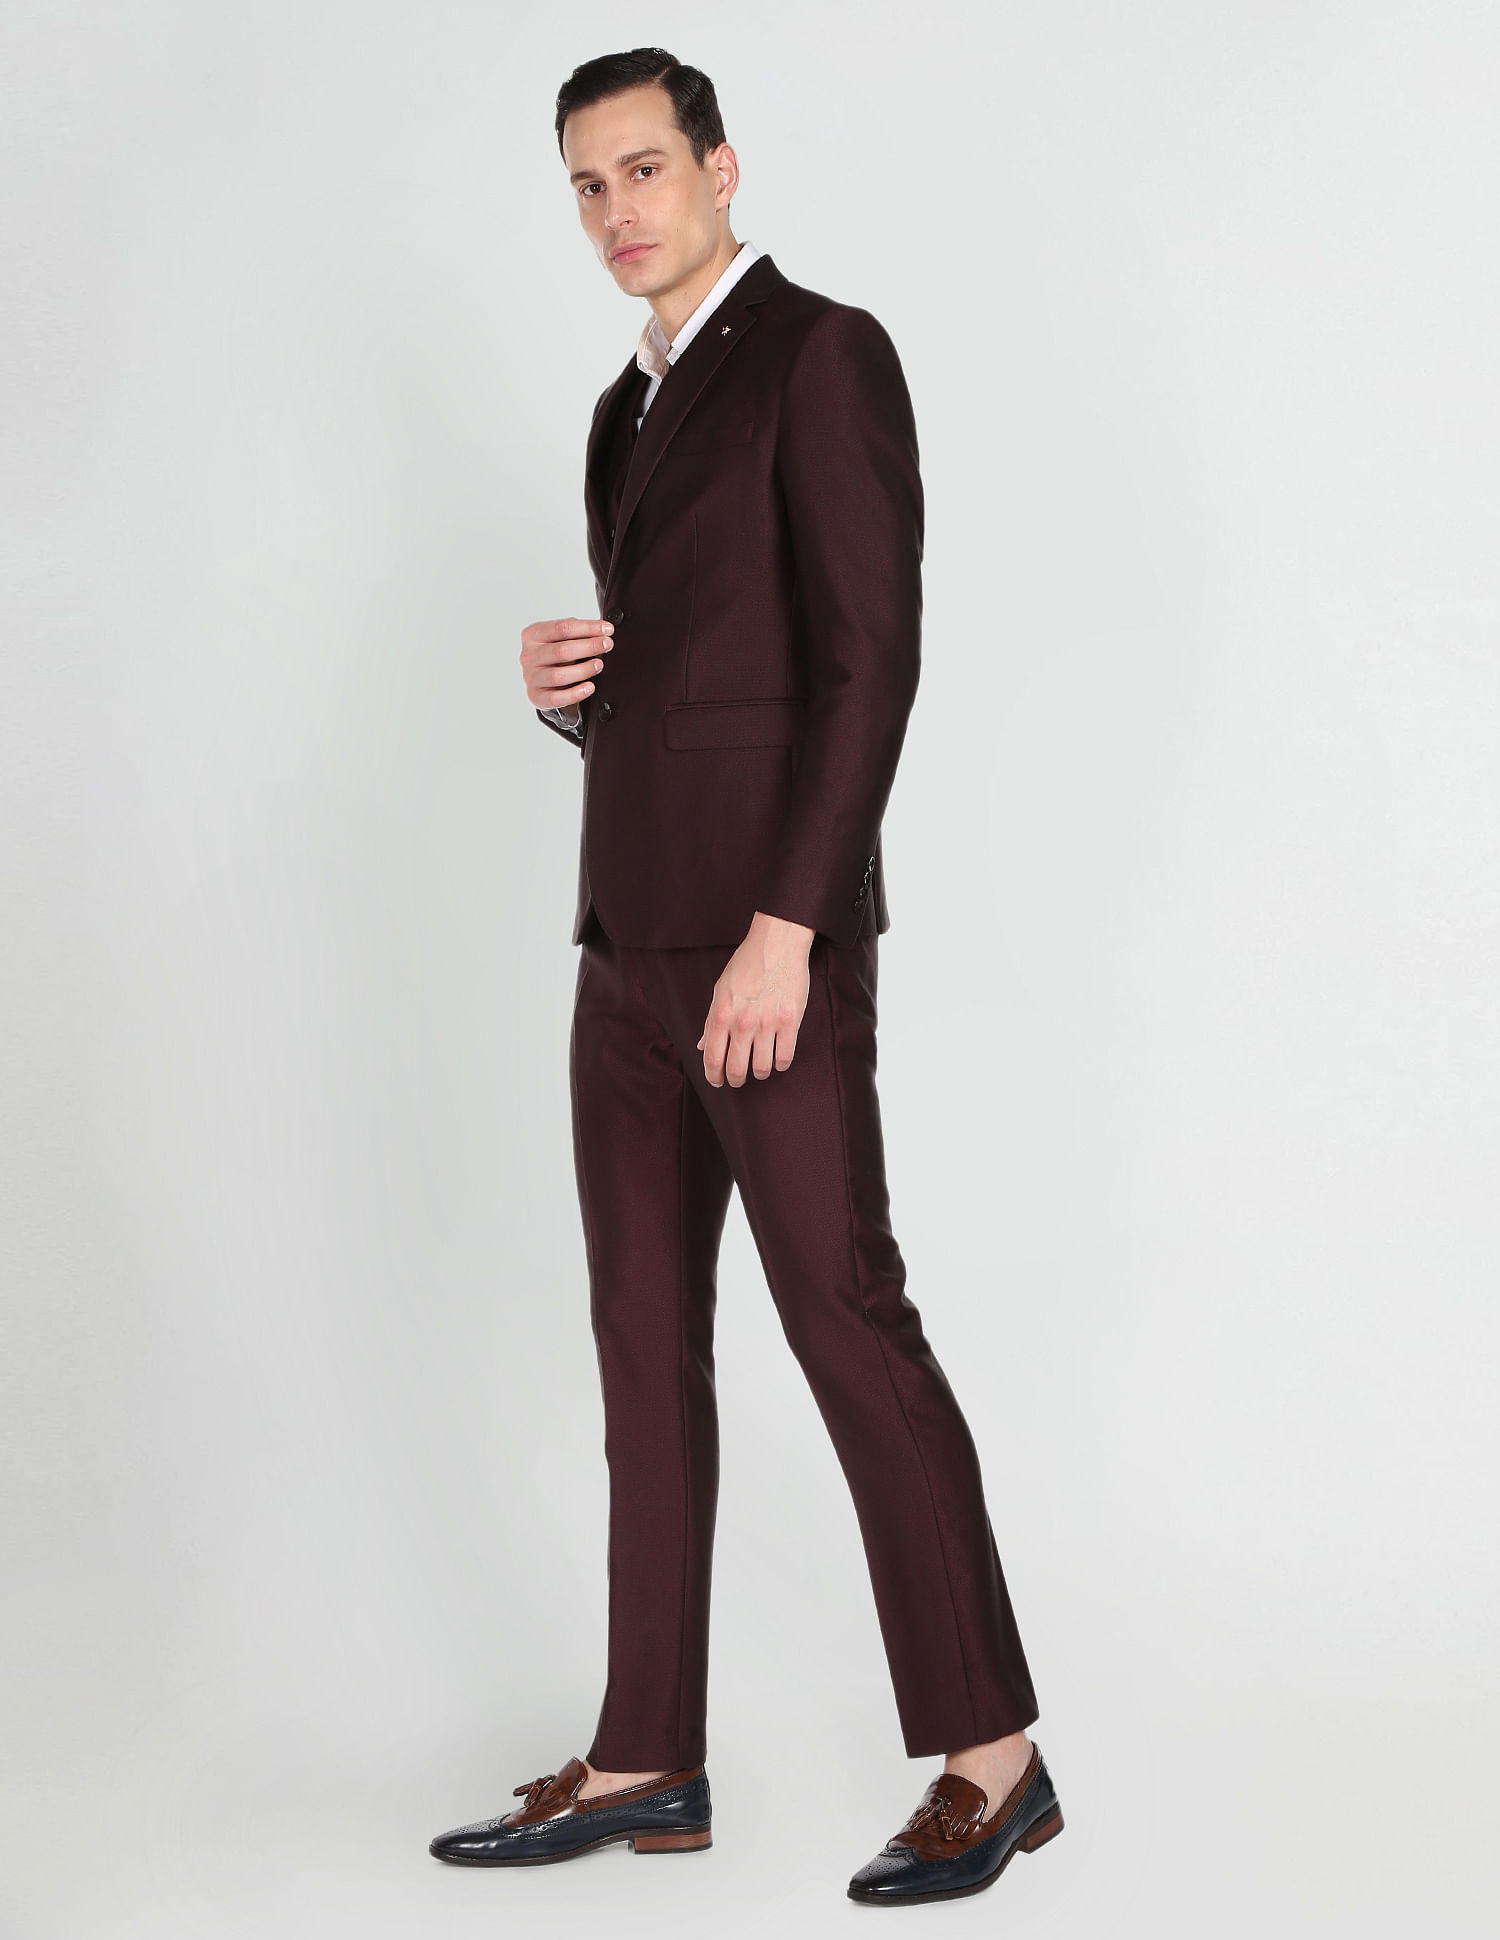 Burgundy Suits | Wine Red Suits | Suit Direct